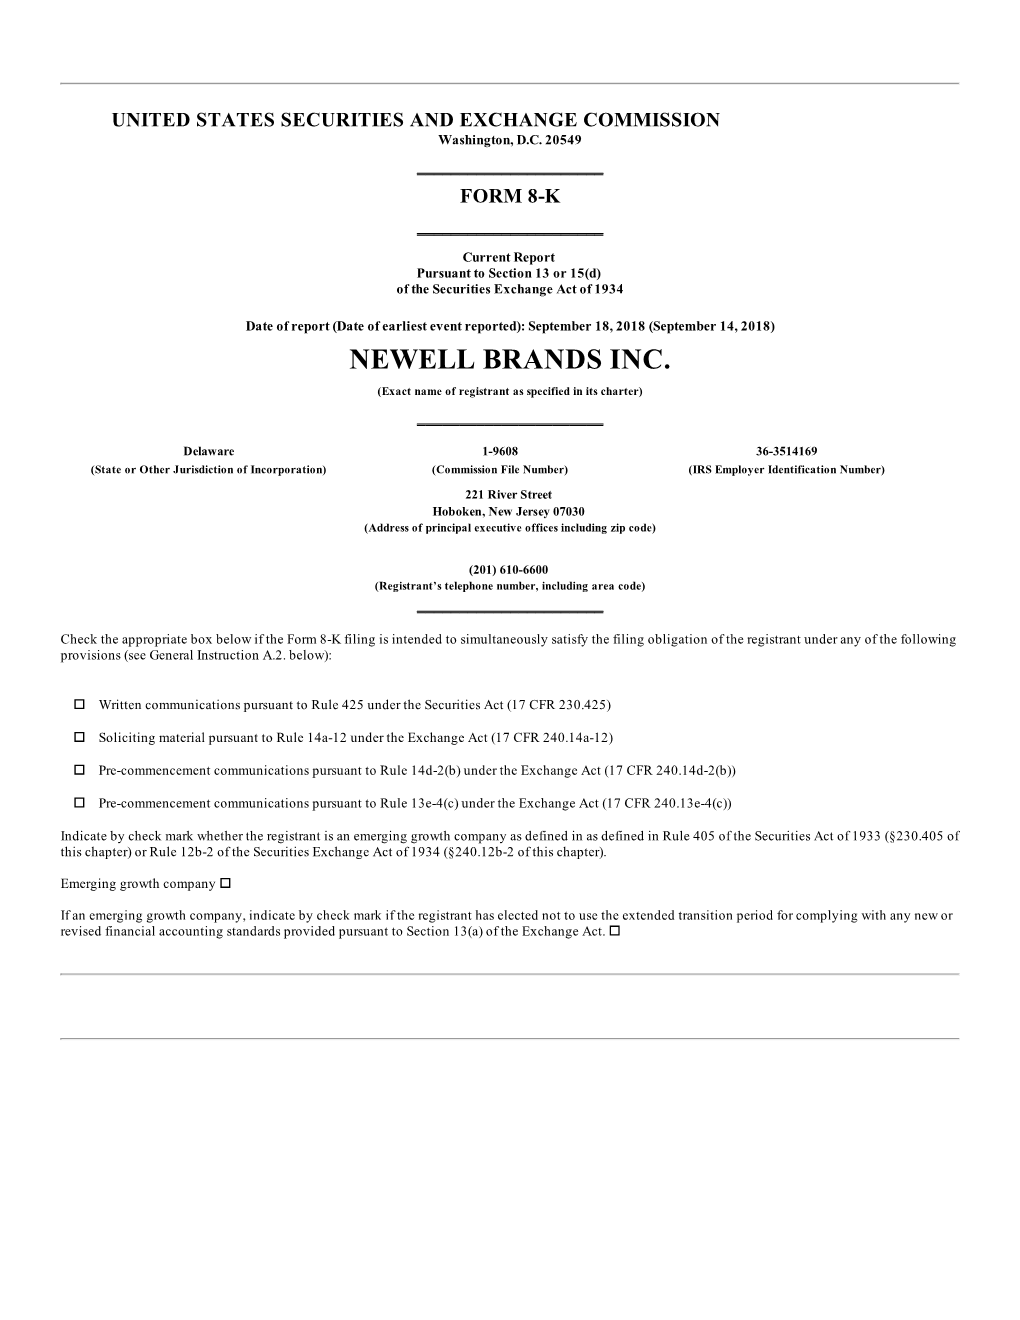 NEWELL BRANDS INC. (Exact Name of Registrant As Specified in Its Charter) ______